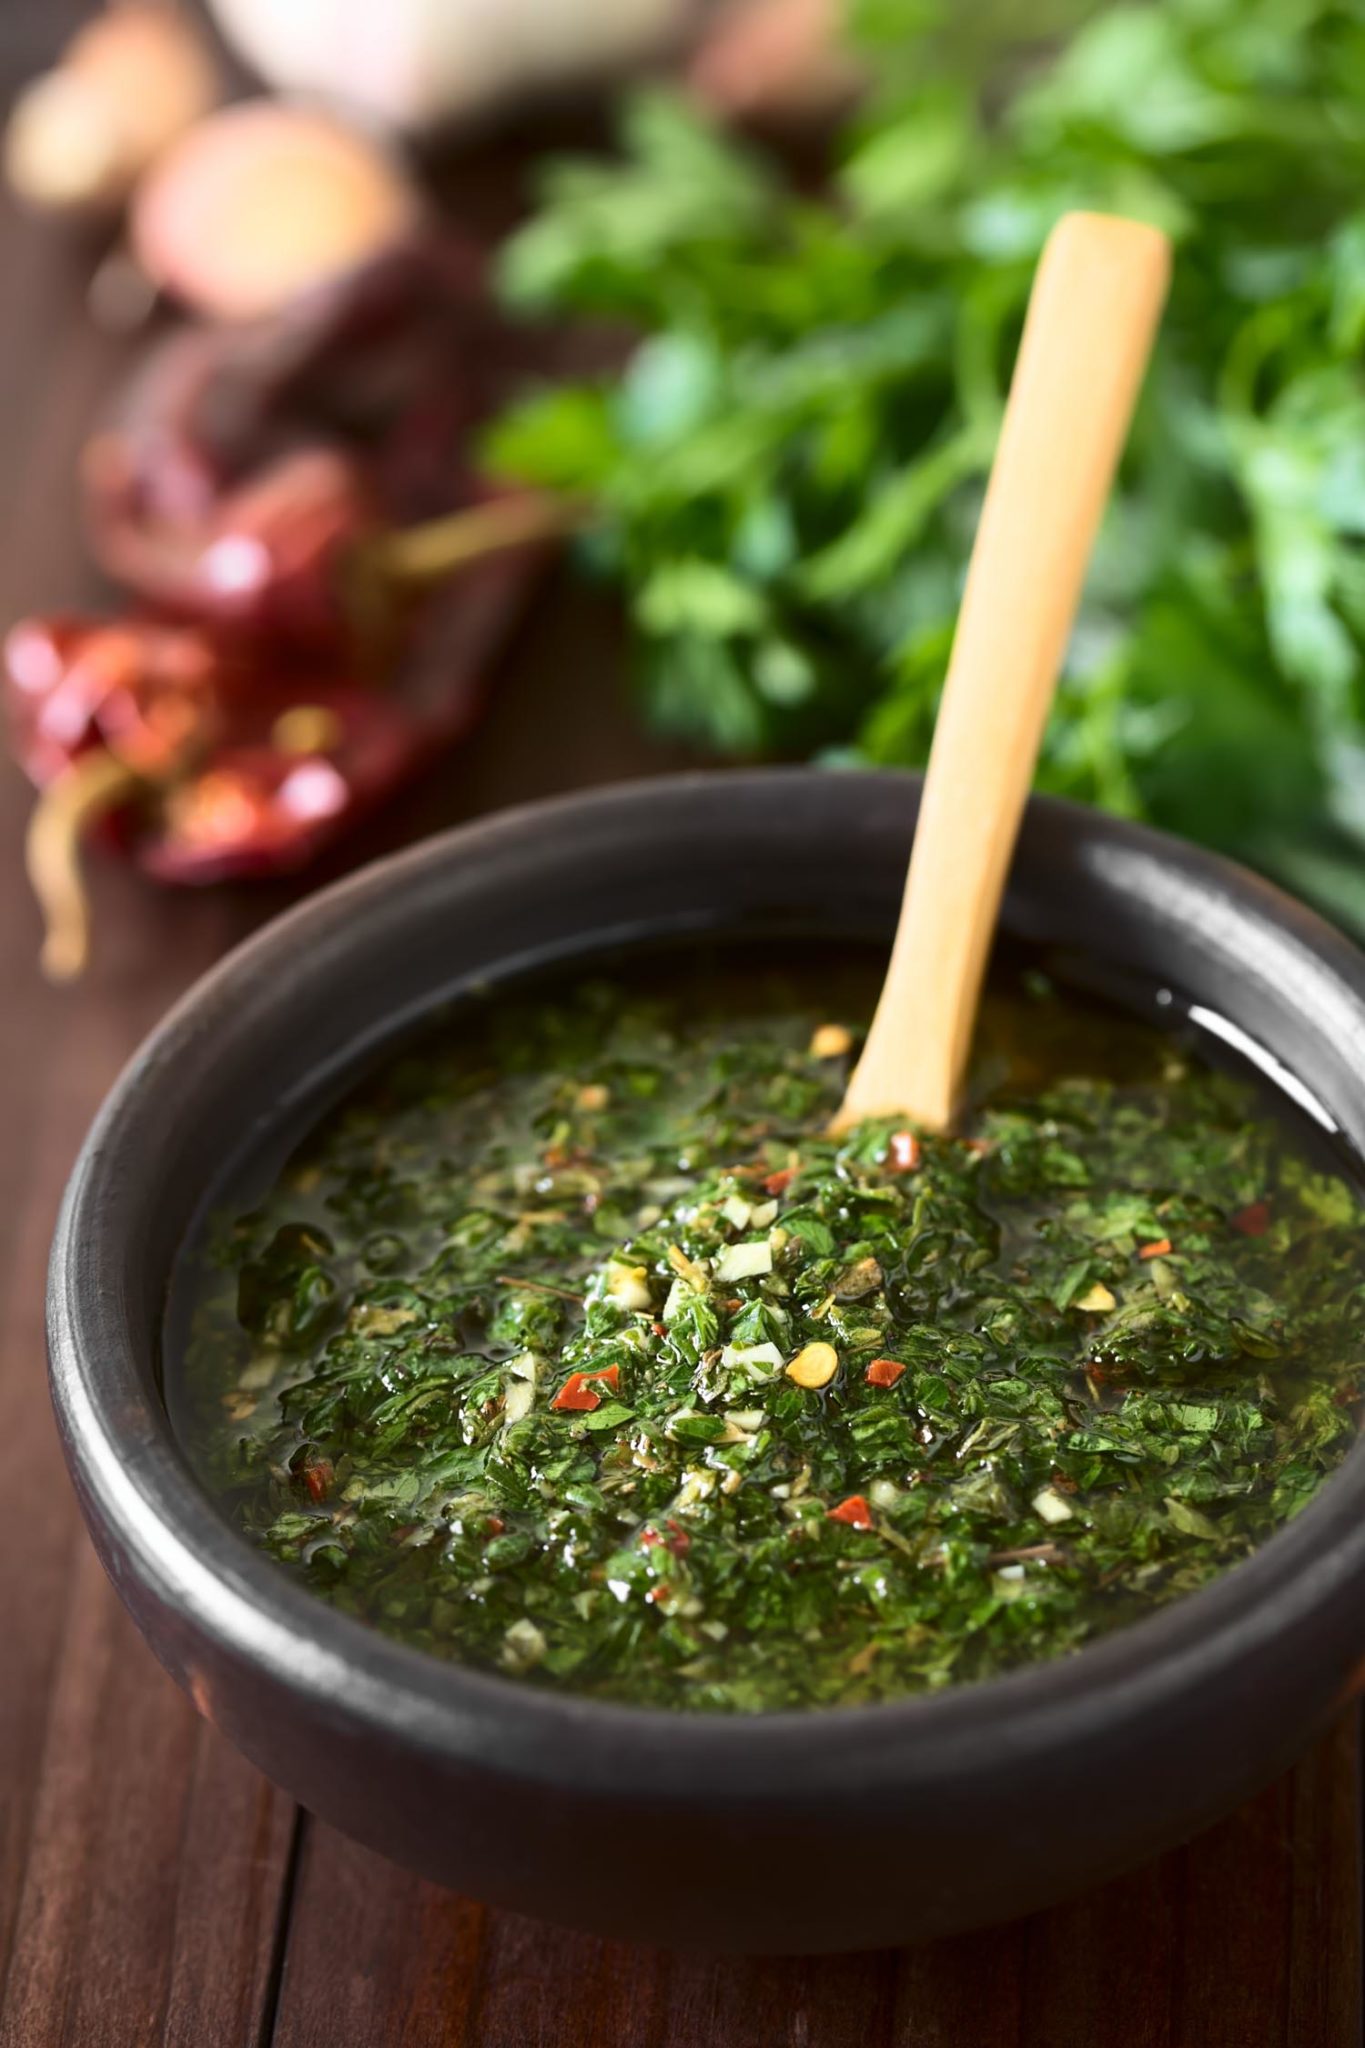 Easy Argentinean Chimichurri Recipe - Bacon is Magic